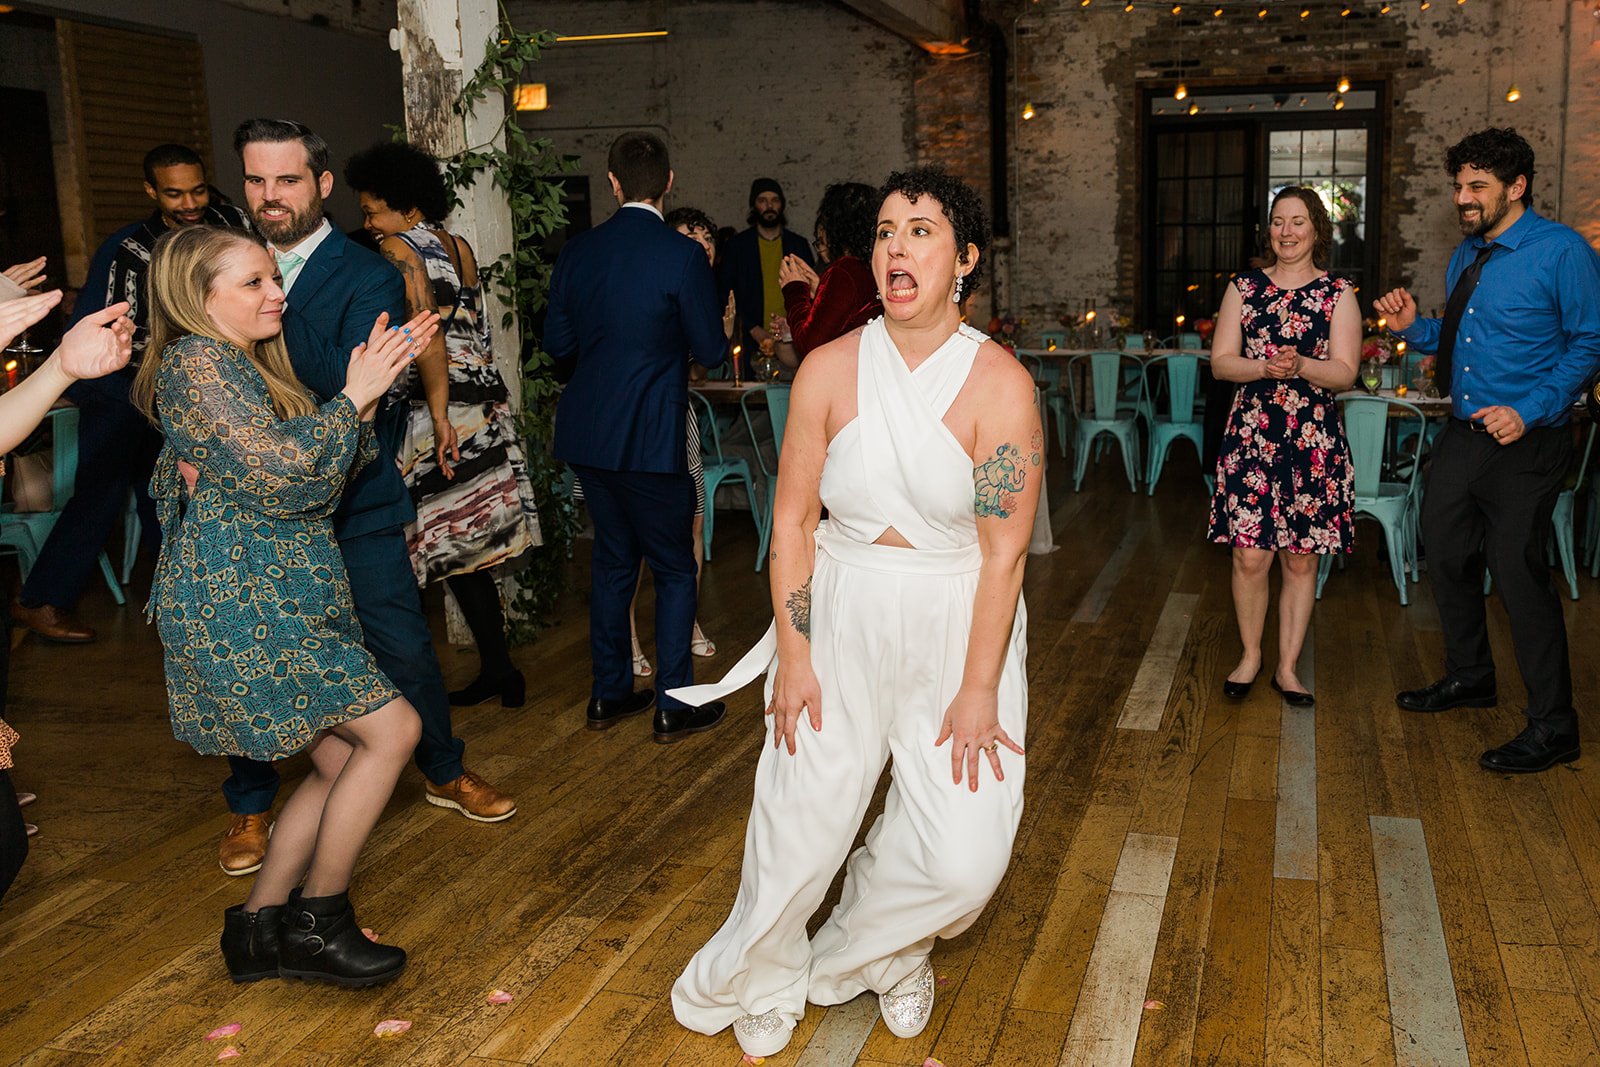  Documentary candid photo of bride dancing at nontraditional Jewish and Venezuelan wedding reception at The Joinery Chicago an Industrial loft wedding venue In Logan Square.  